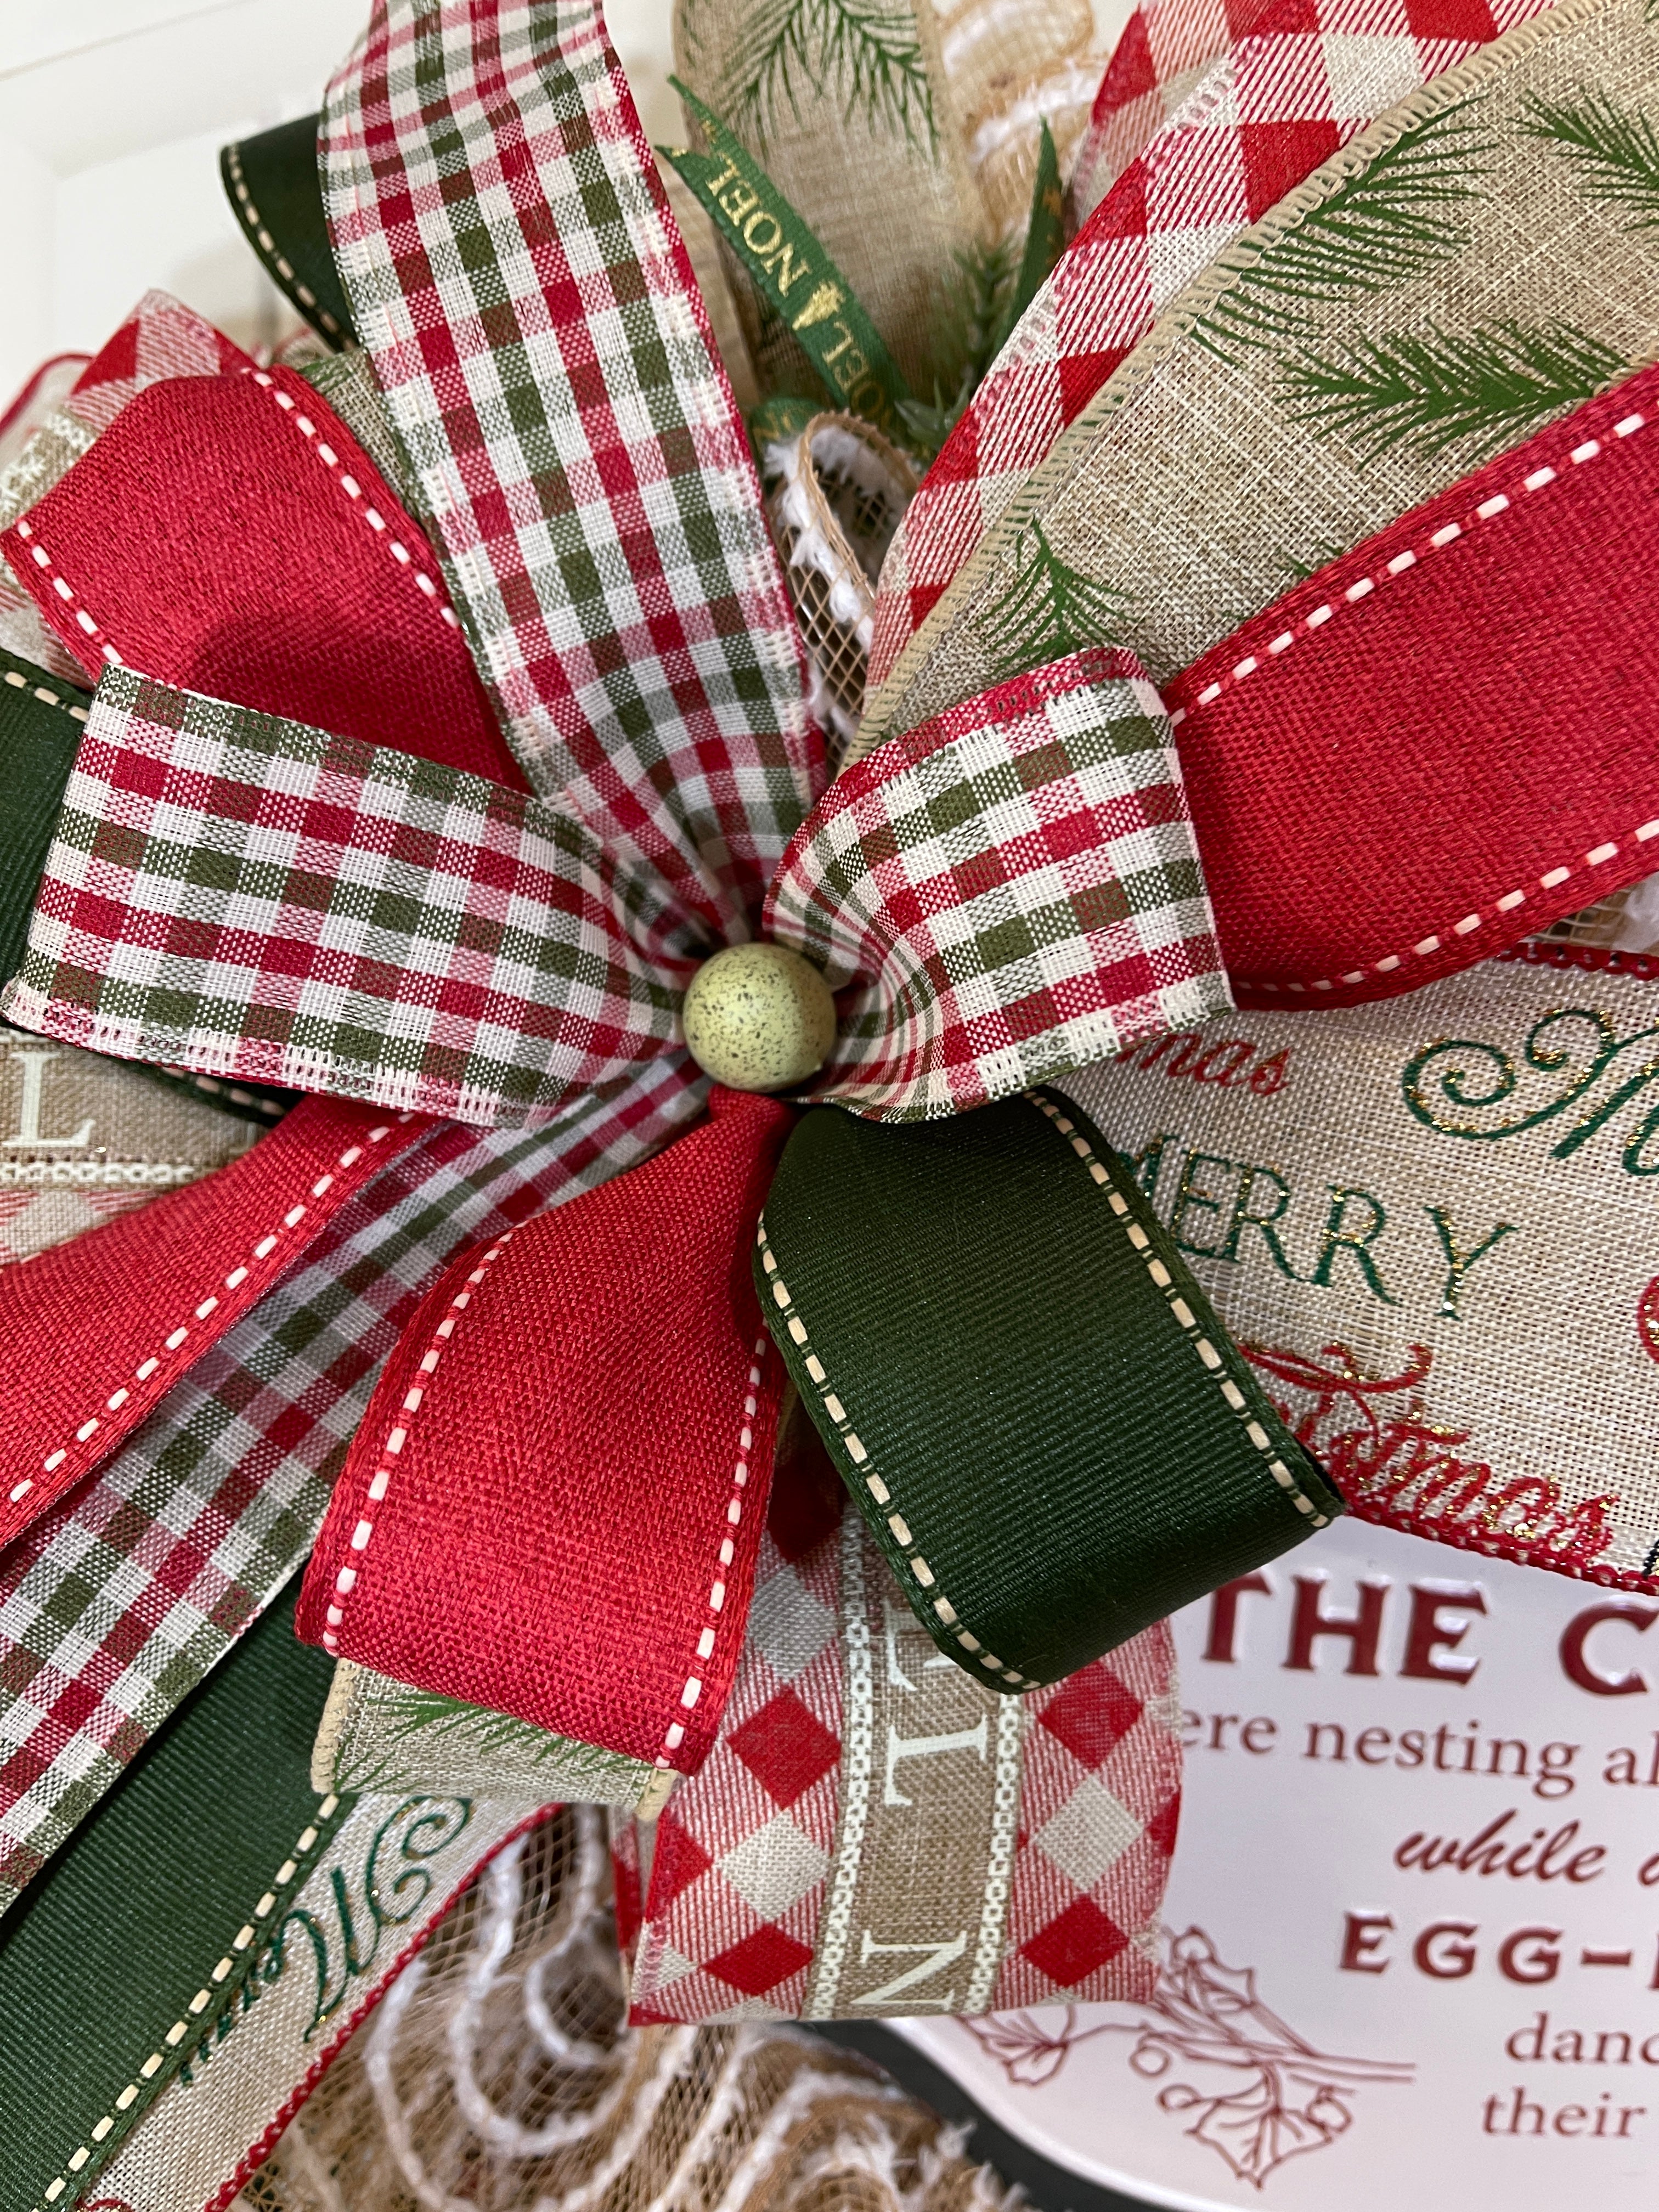 Close Up of Bow with Red, White and Green Gingham Ribbon, Green with Beige Stitching on the Edge Ribbon, Red with Tan Stitching on the Edge of the Ribbon, Merry Christmas Ribbon, Small Green Speckled Egg in the Center of the Bow on a Chicken Christmas Wreath